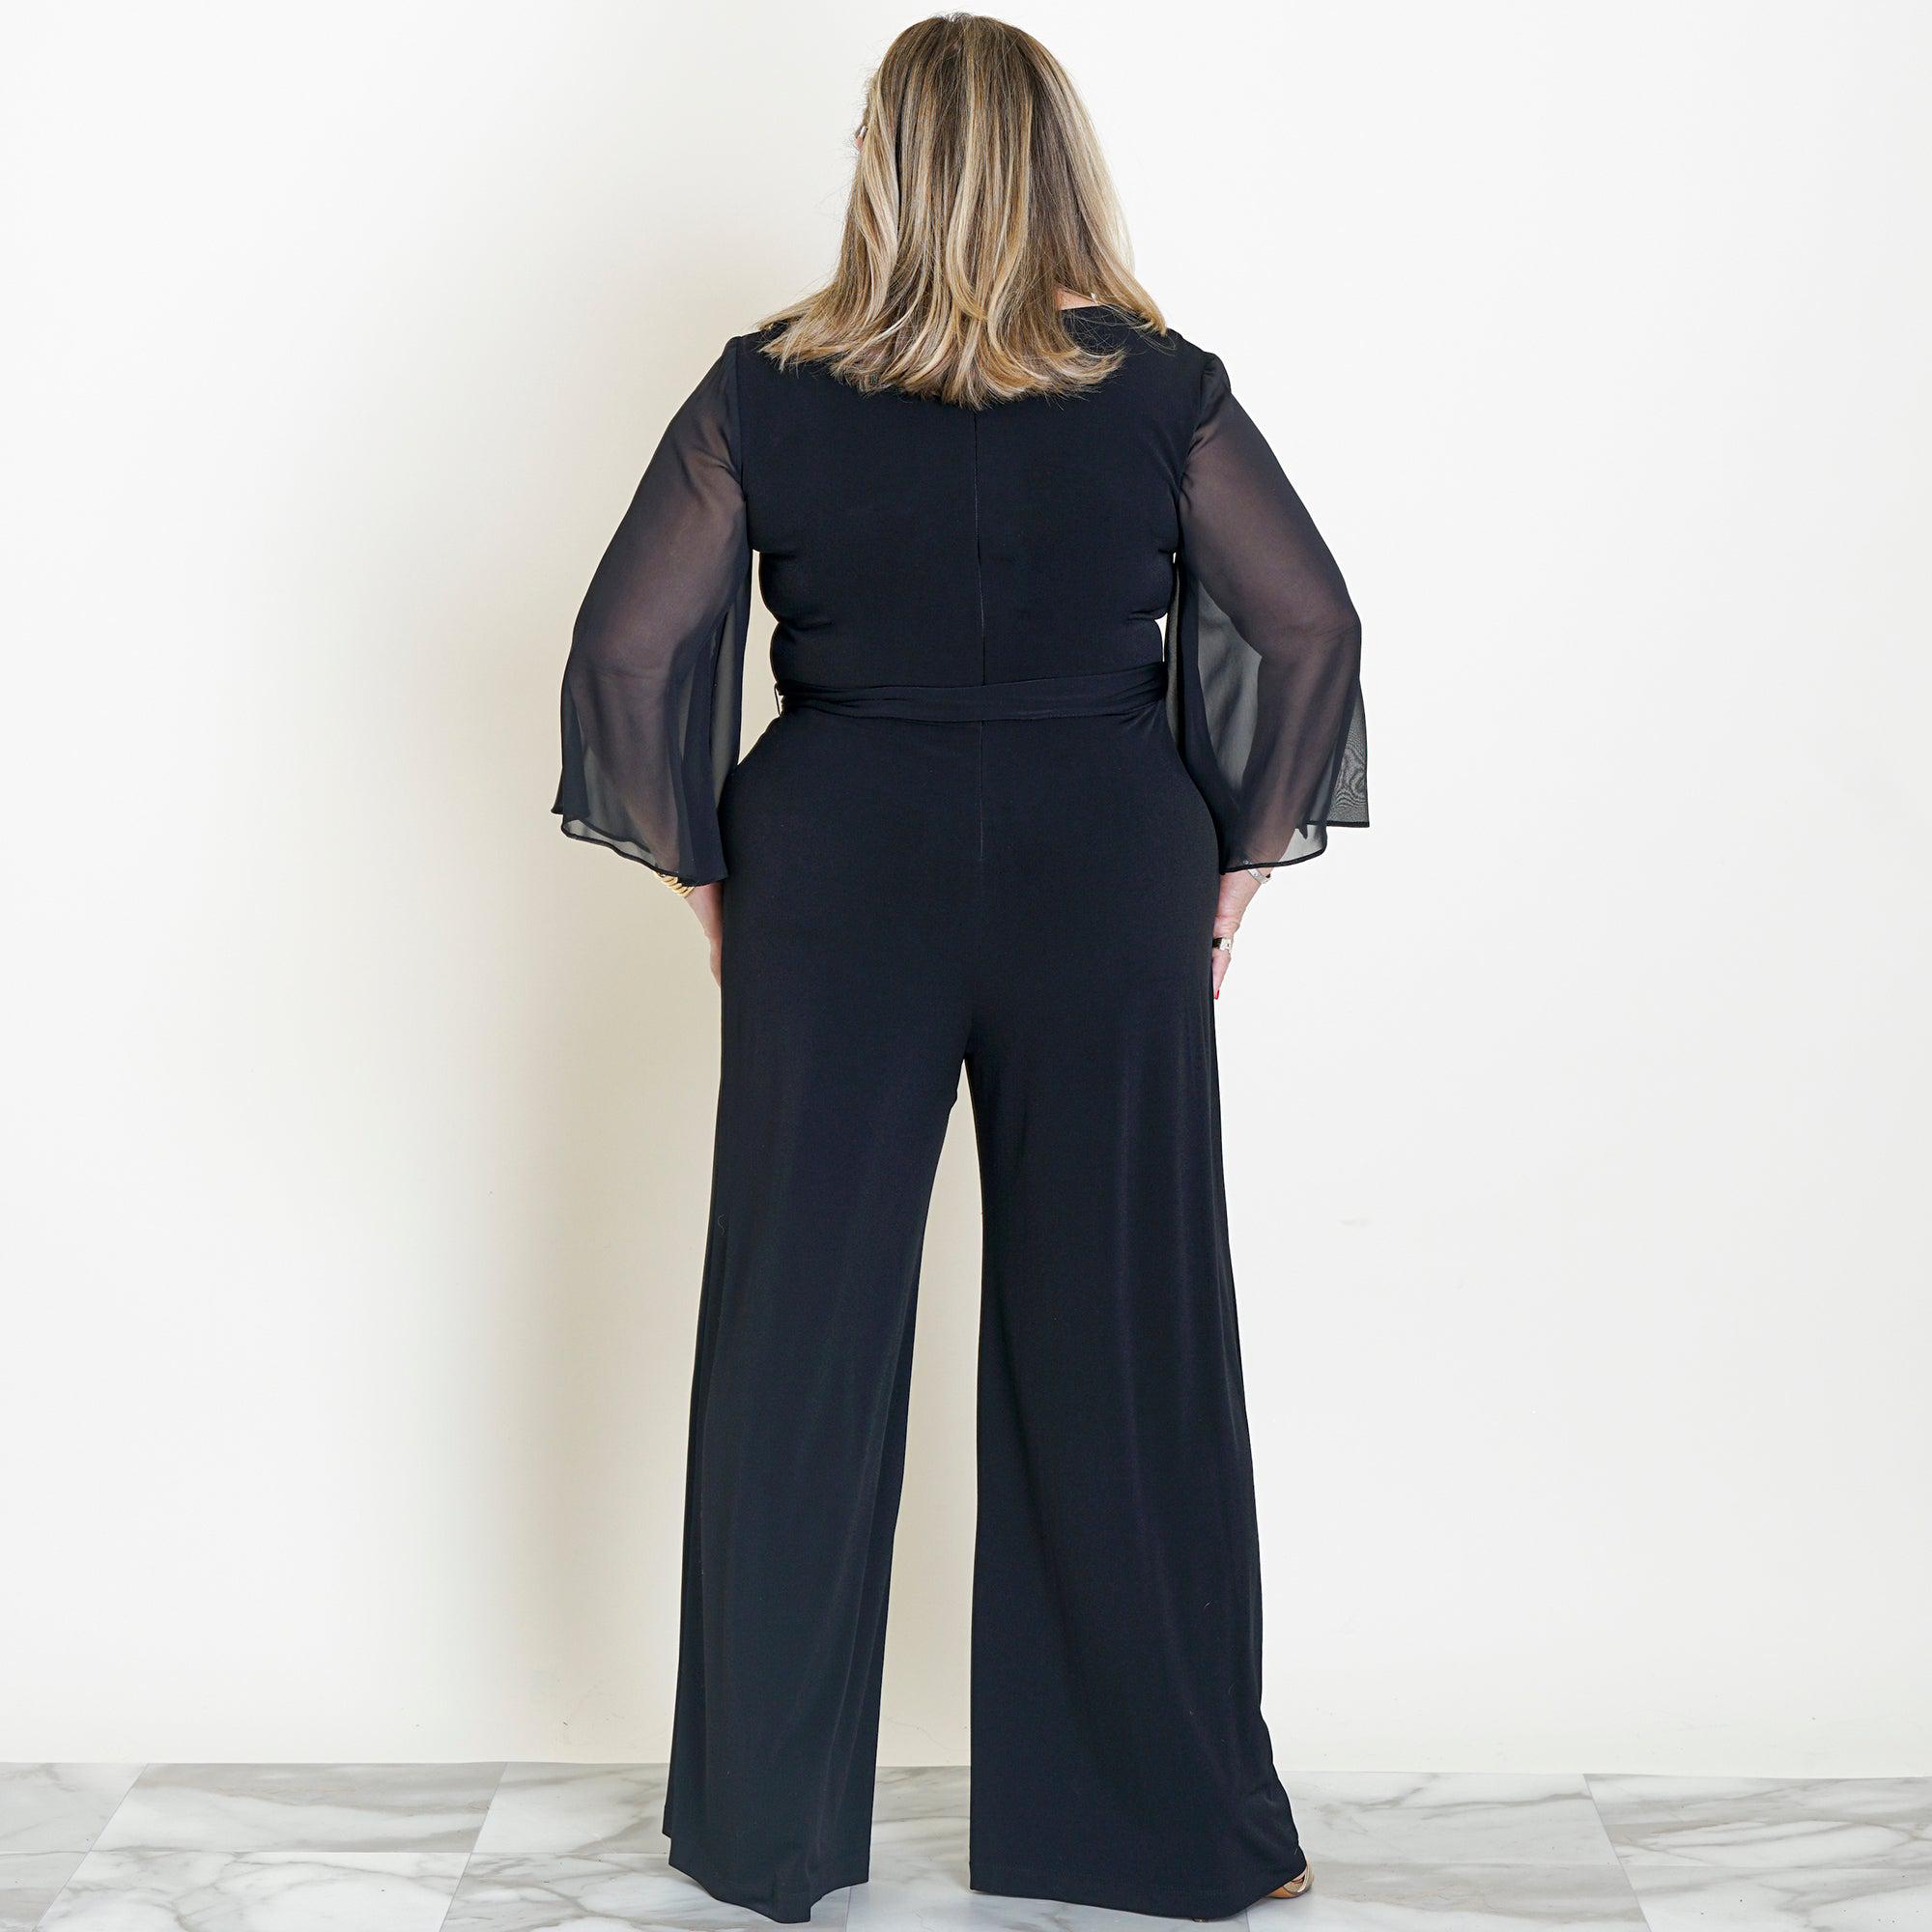 Woman posing wearing Black Uptown 2.0 Black Jumpsuit from Connected Apparel